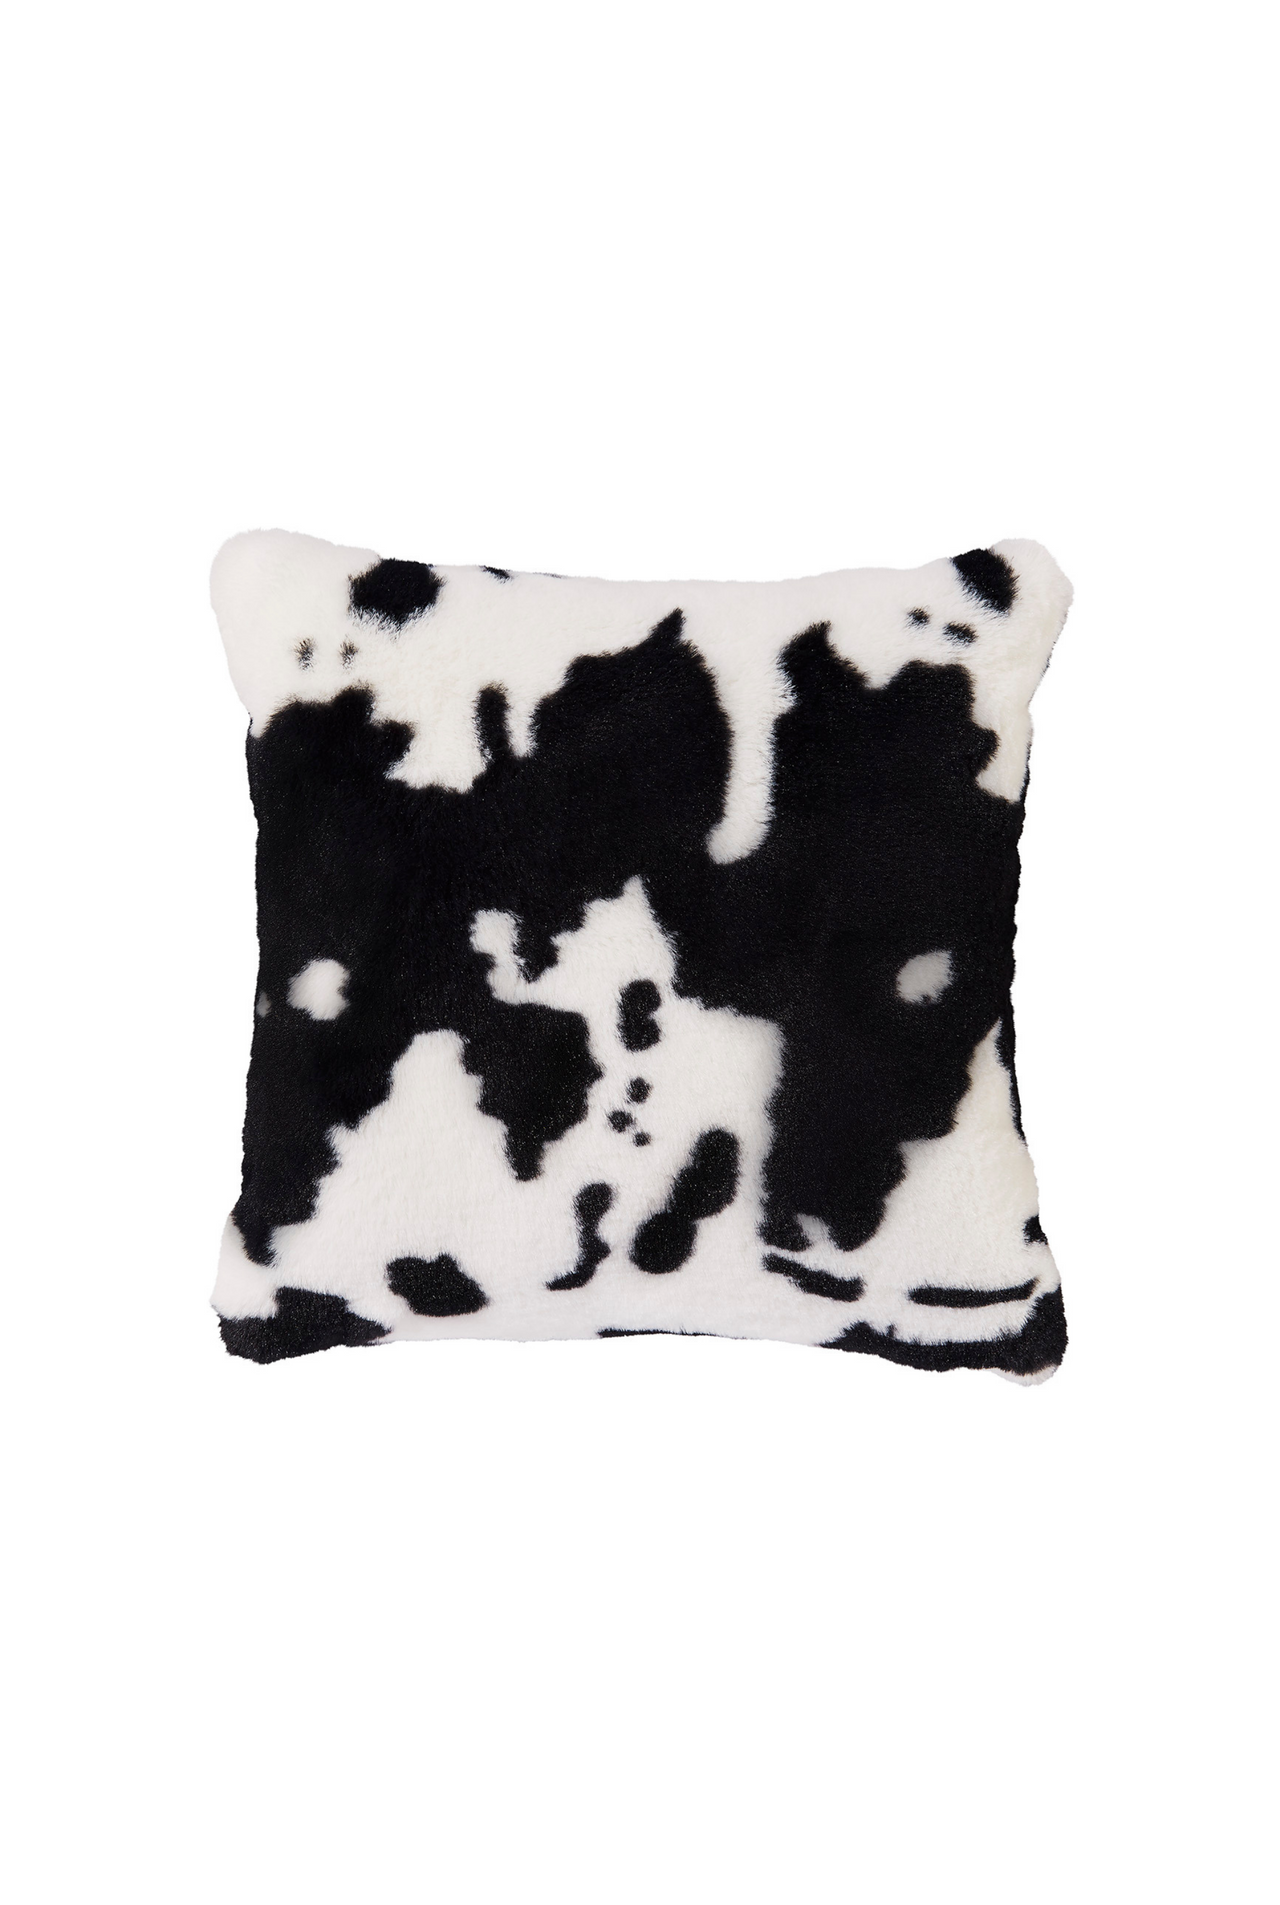 Faux fur throw pillow in black and white cow print.